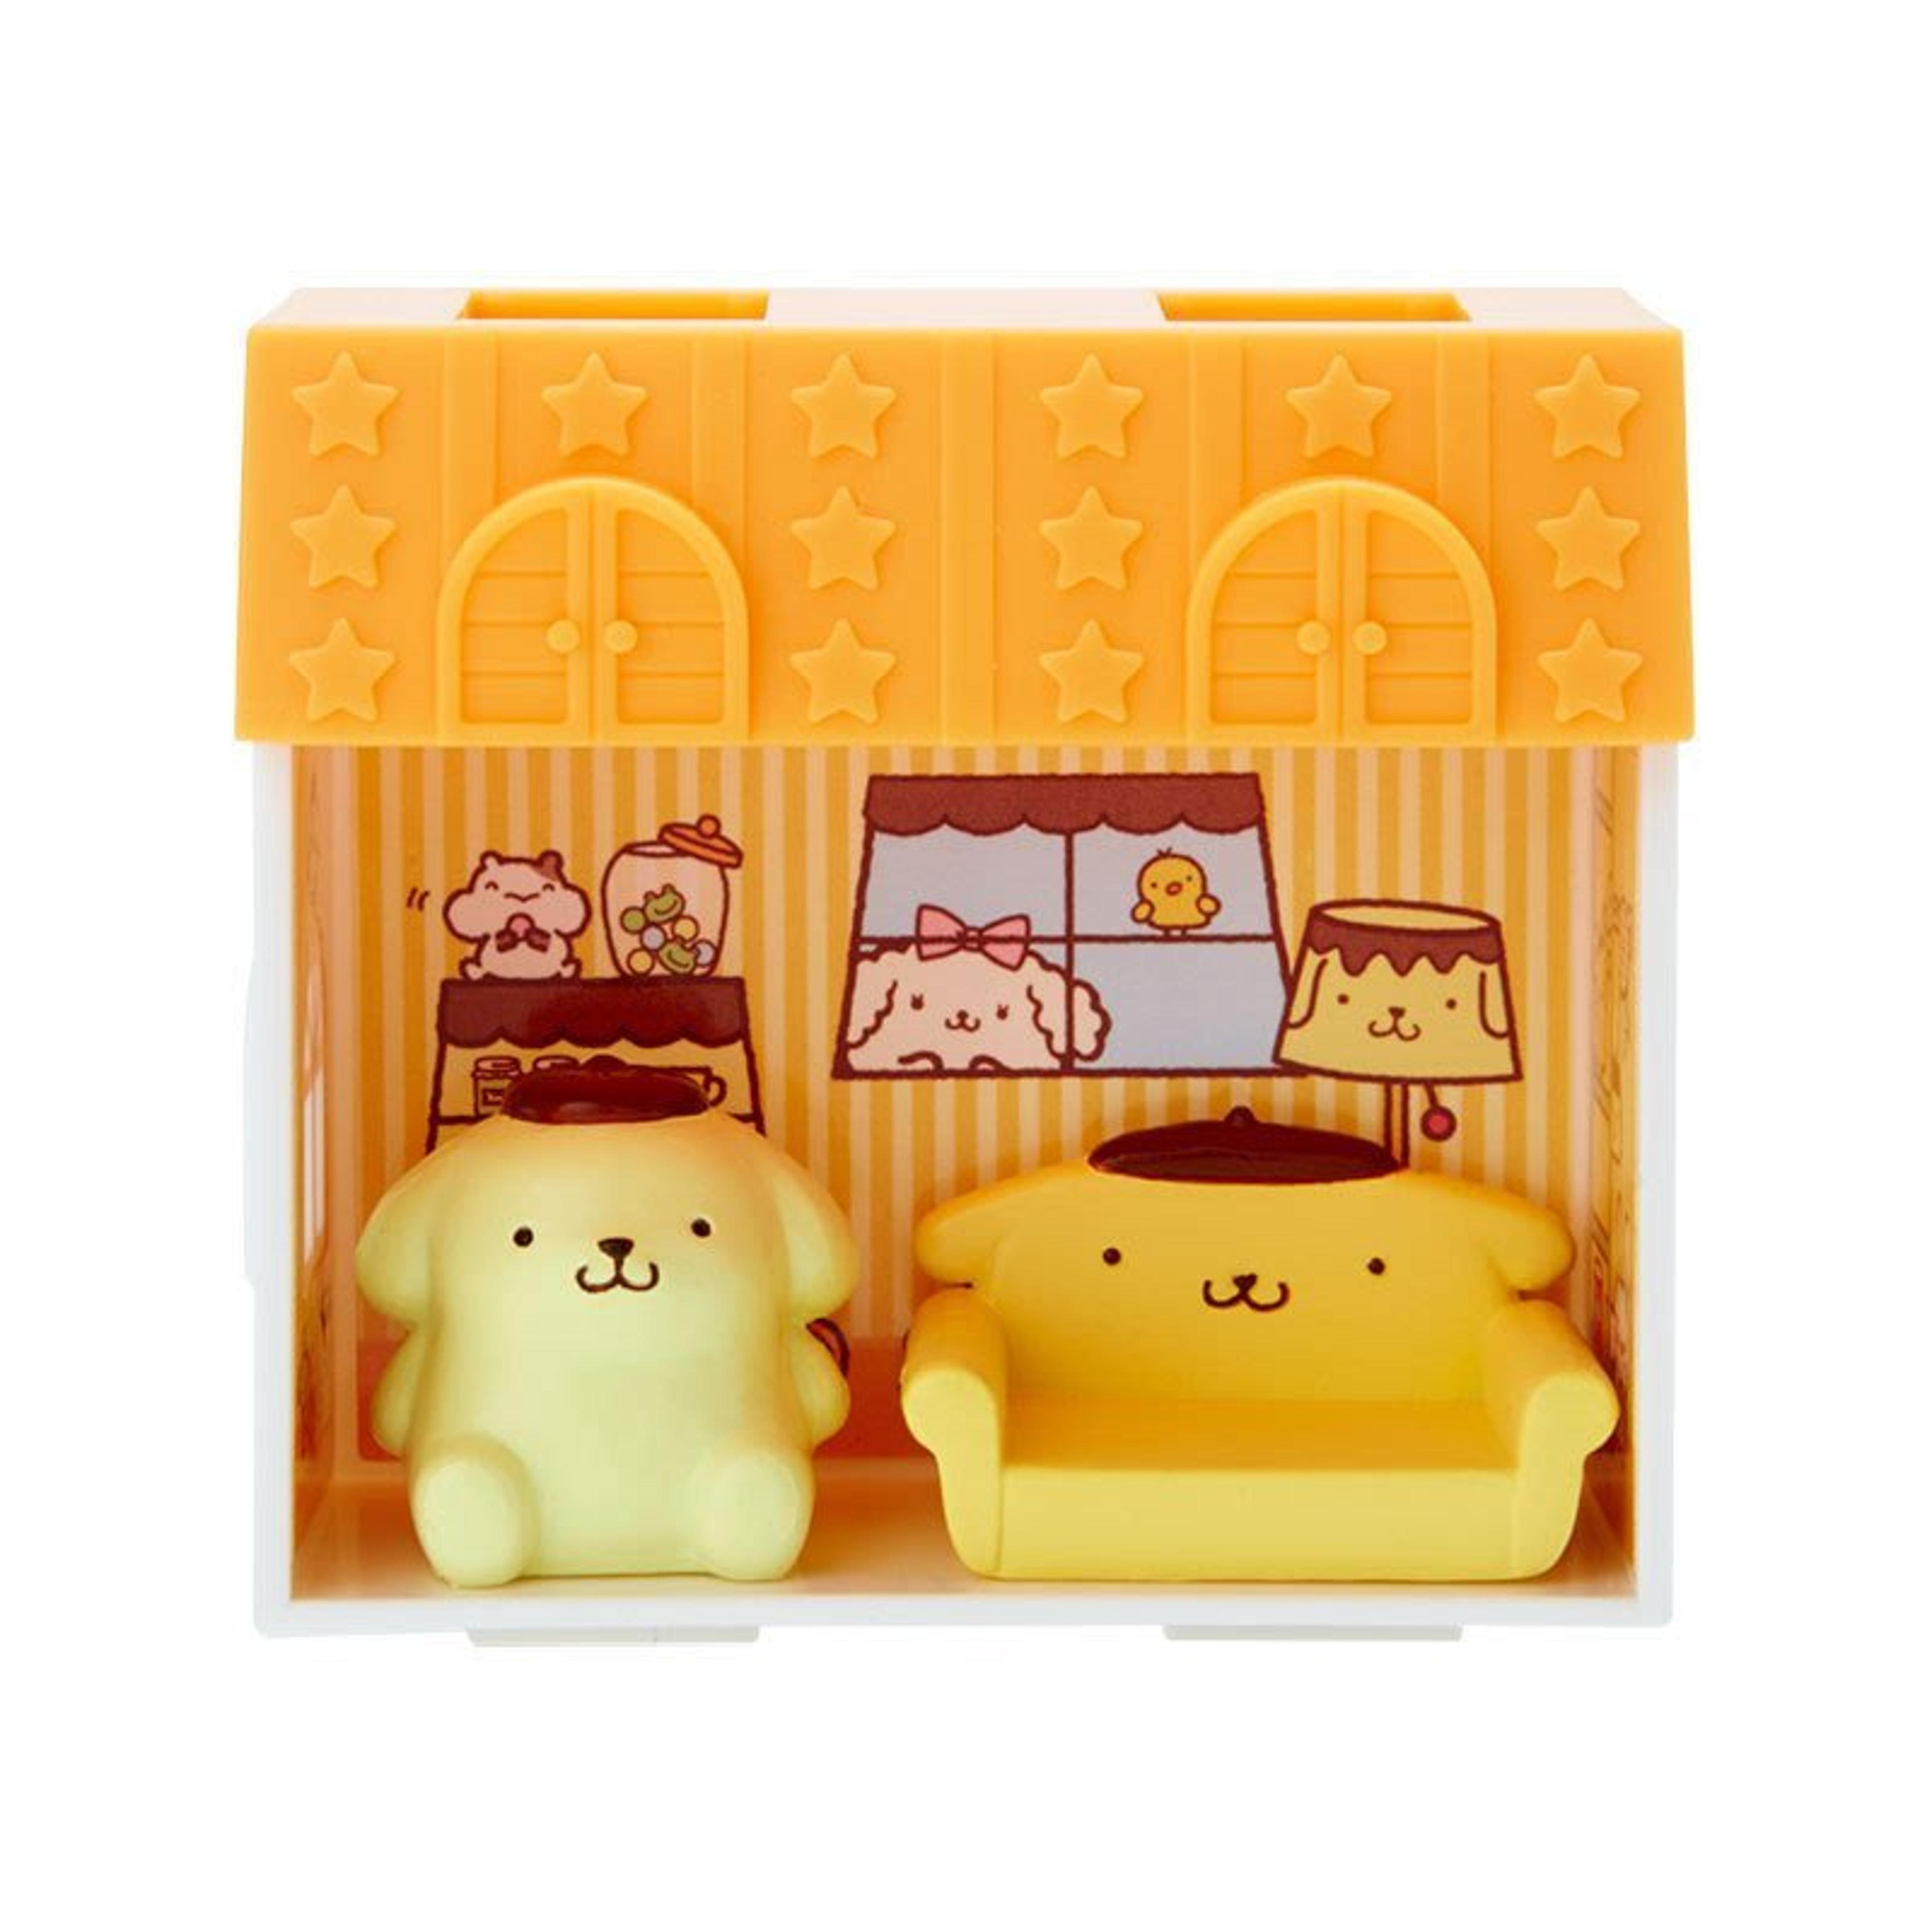 Alternate View 3 of Sanrio Characters Miniature House